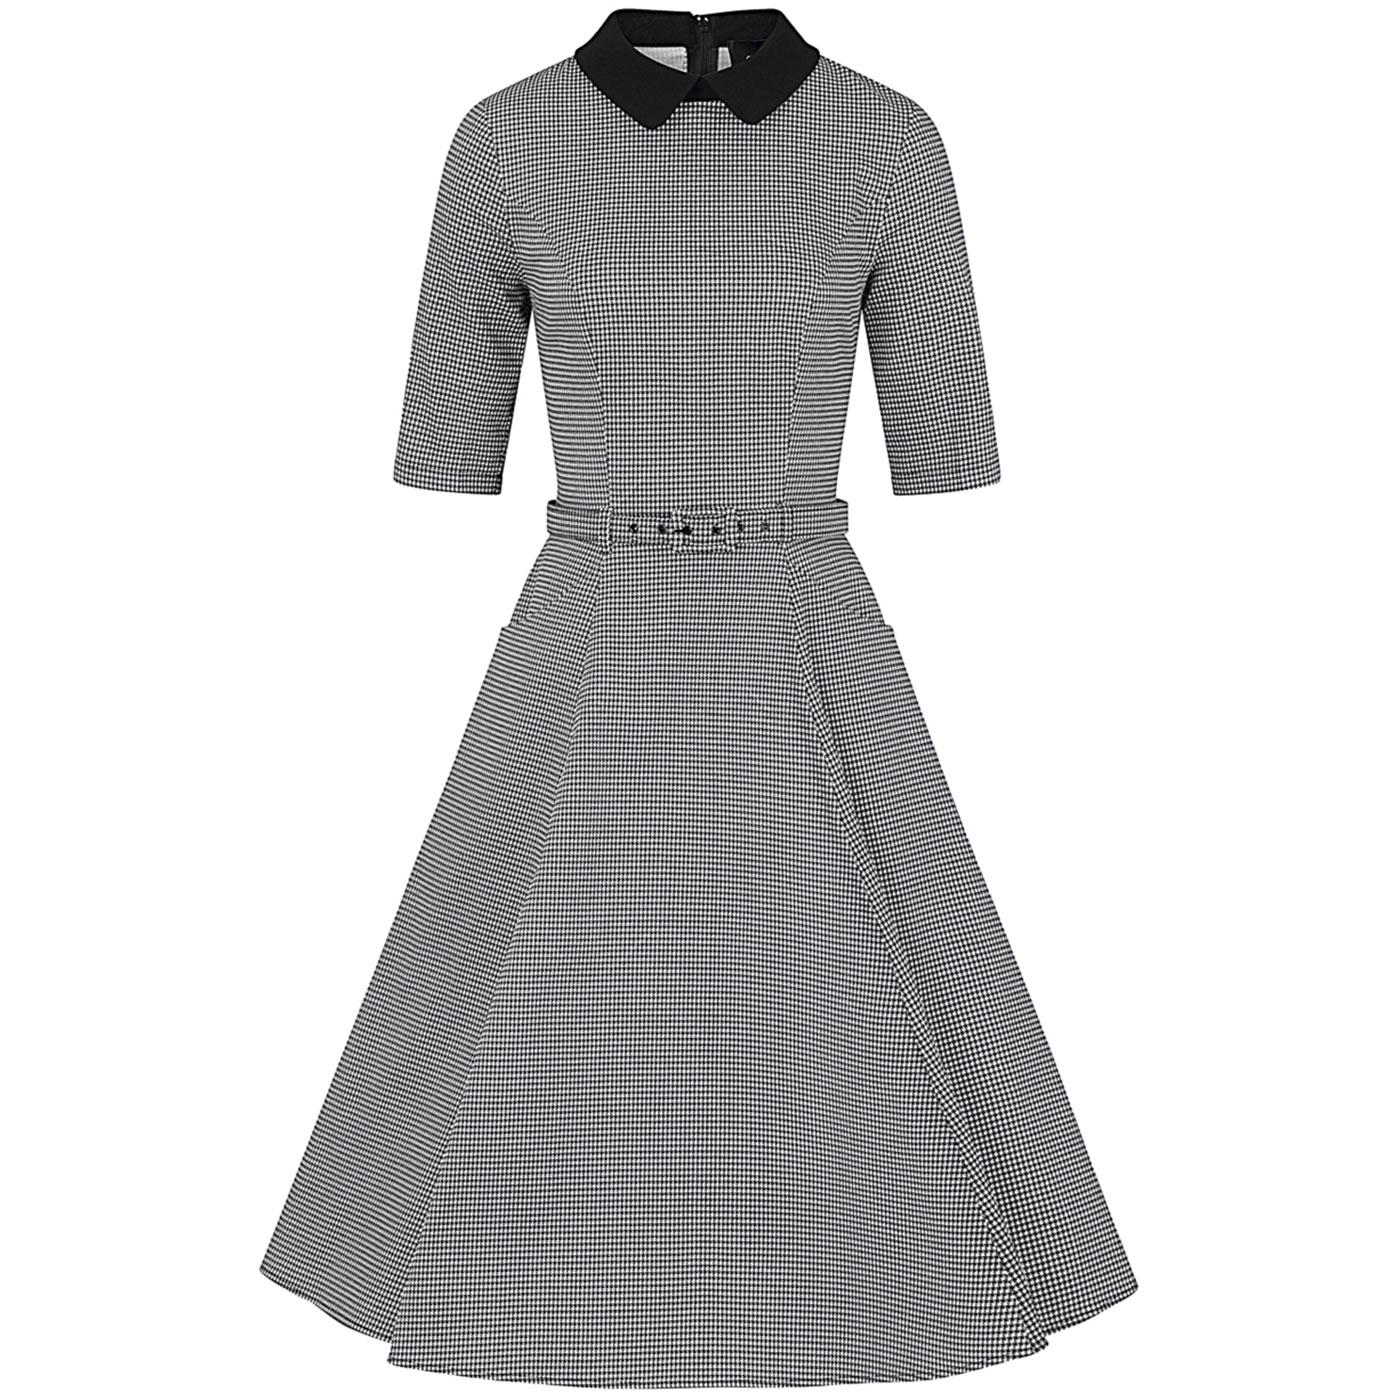 Winona COLLECTIF Houndstooth 1950s Swing Dress